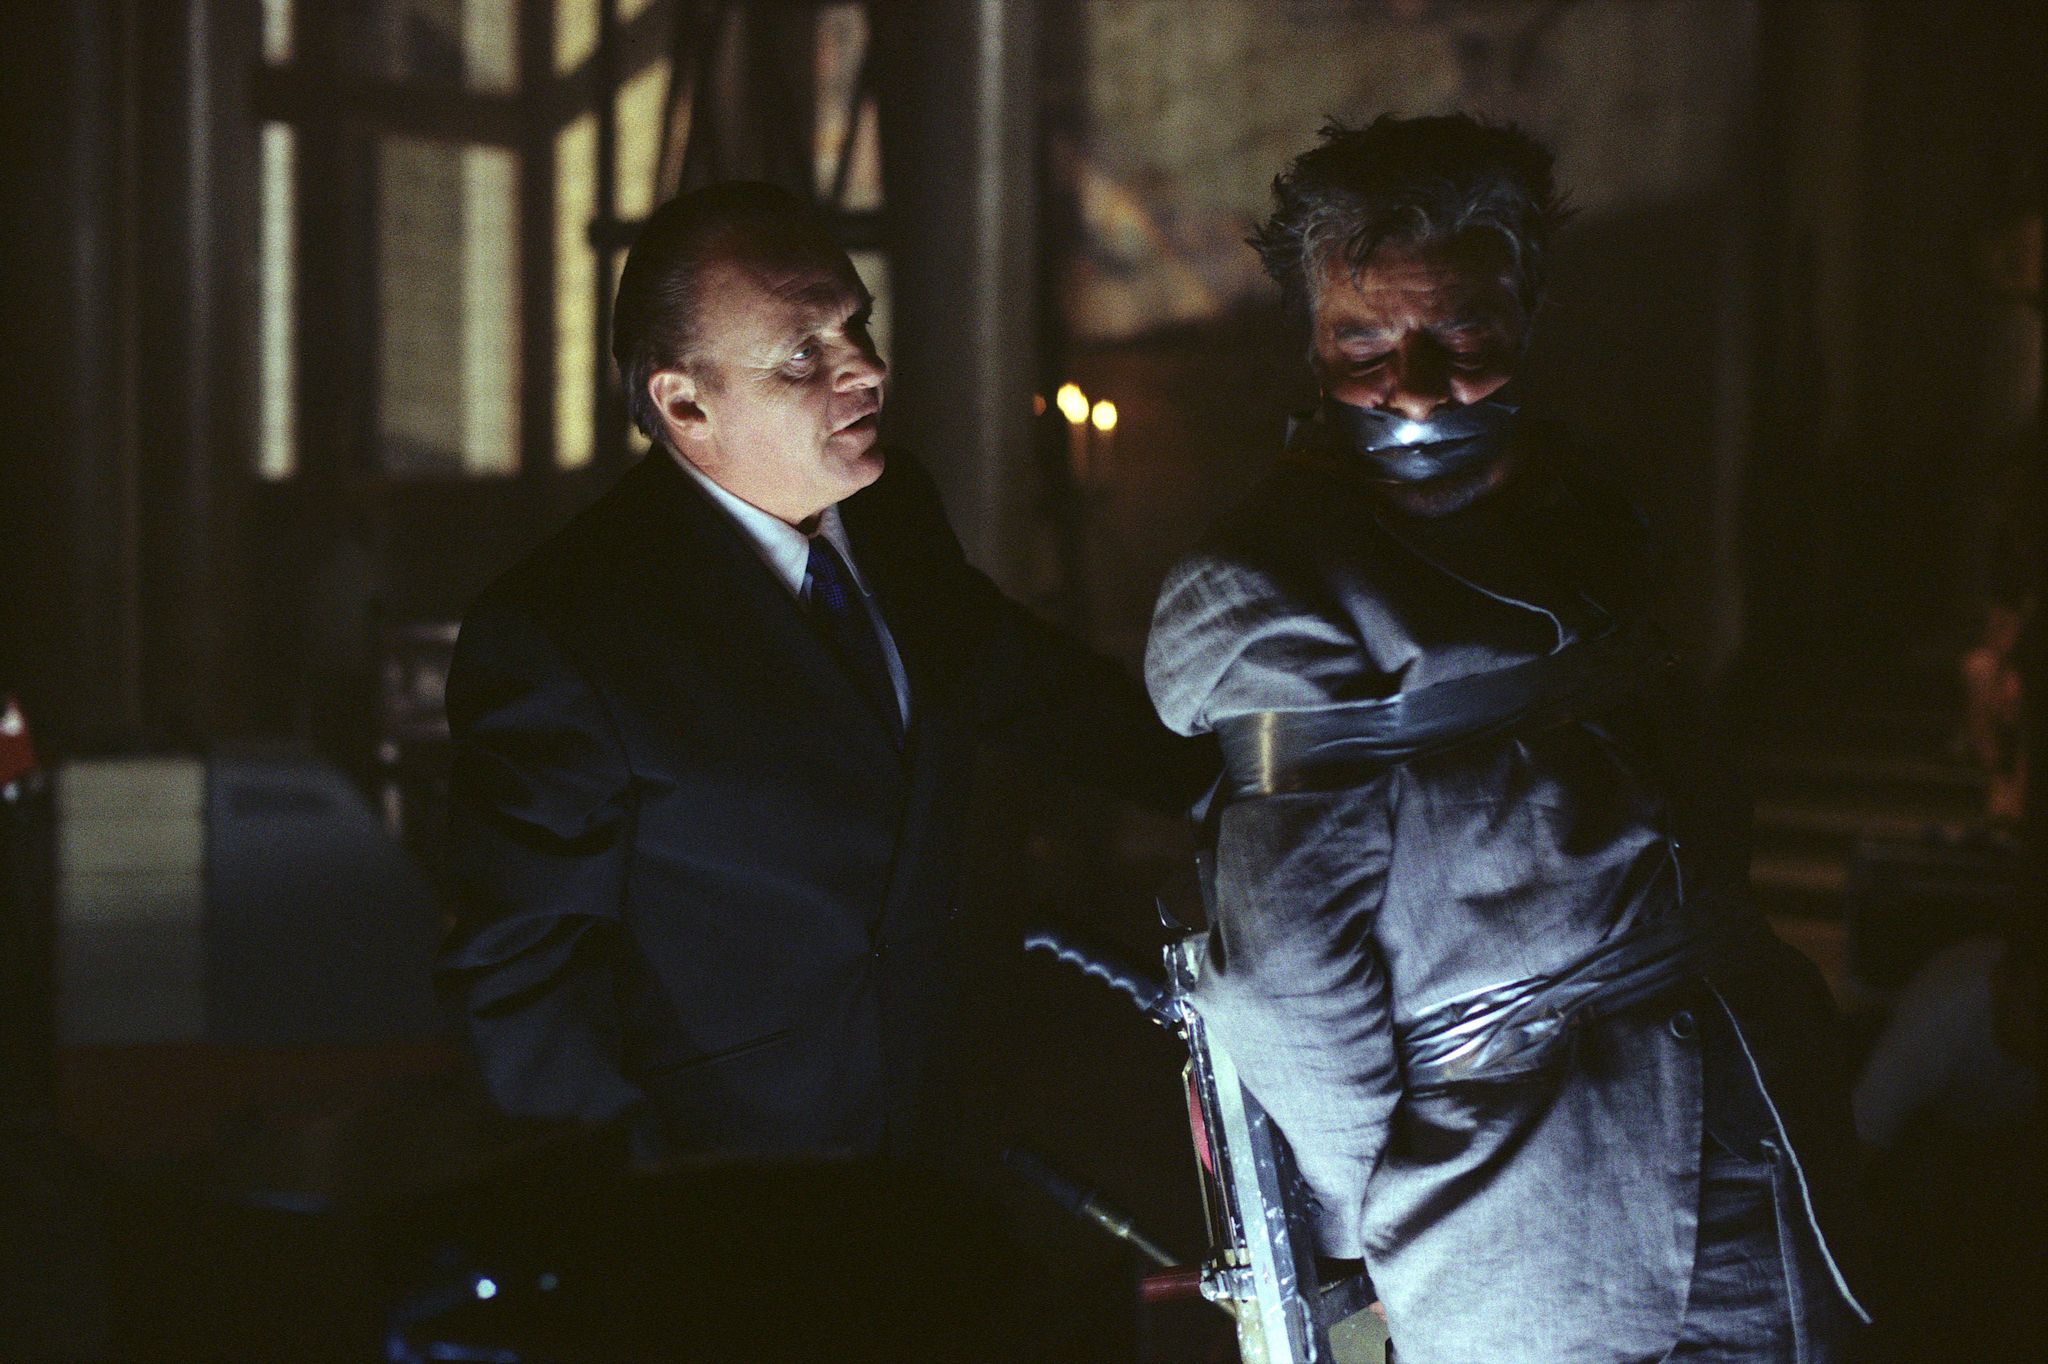 Still of Anthony Hopkins and Giancarlo Giannini in Hannibal (2001)